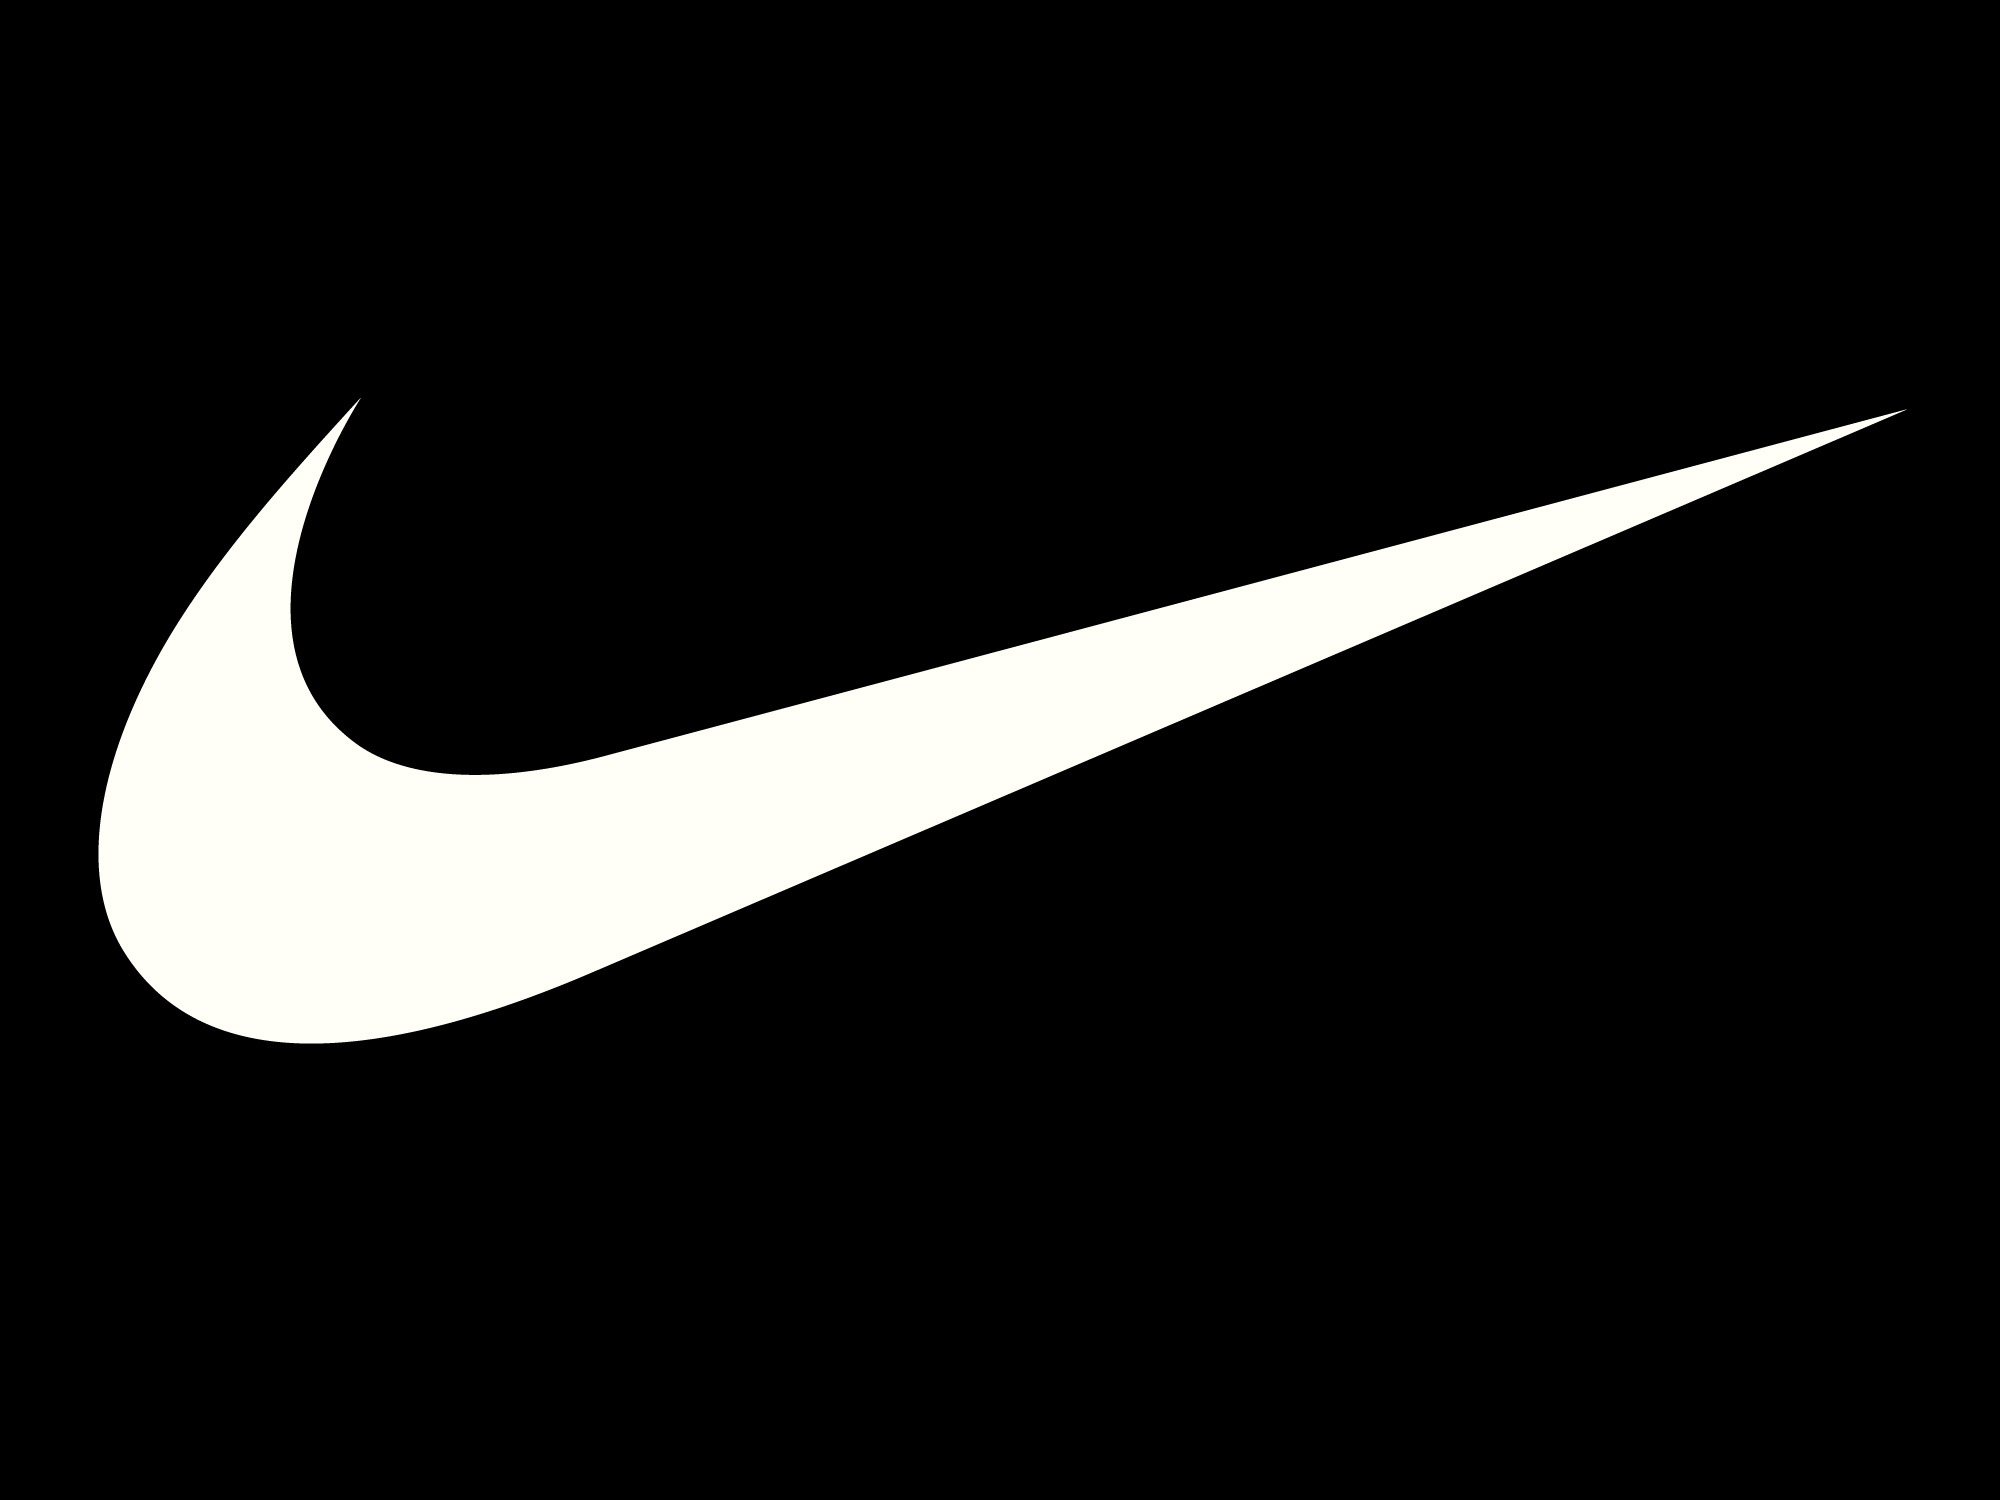 nike nfl contract